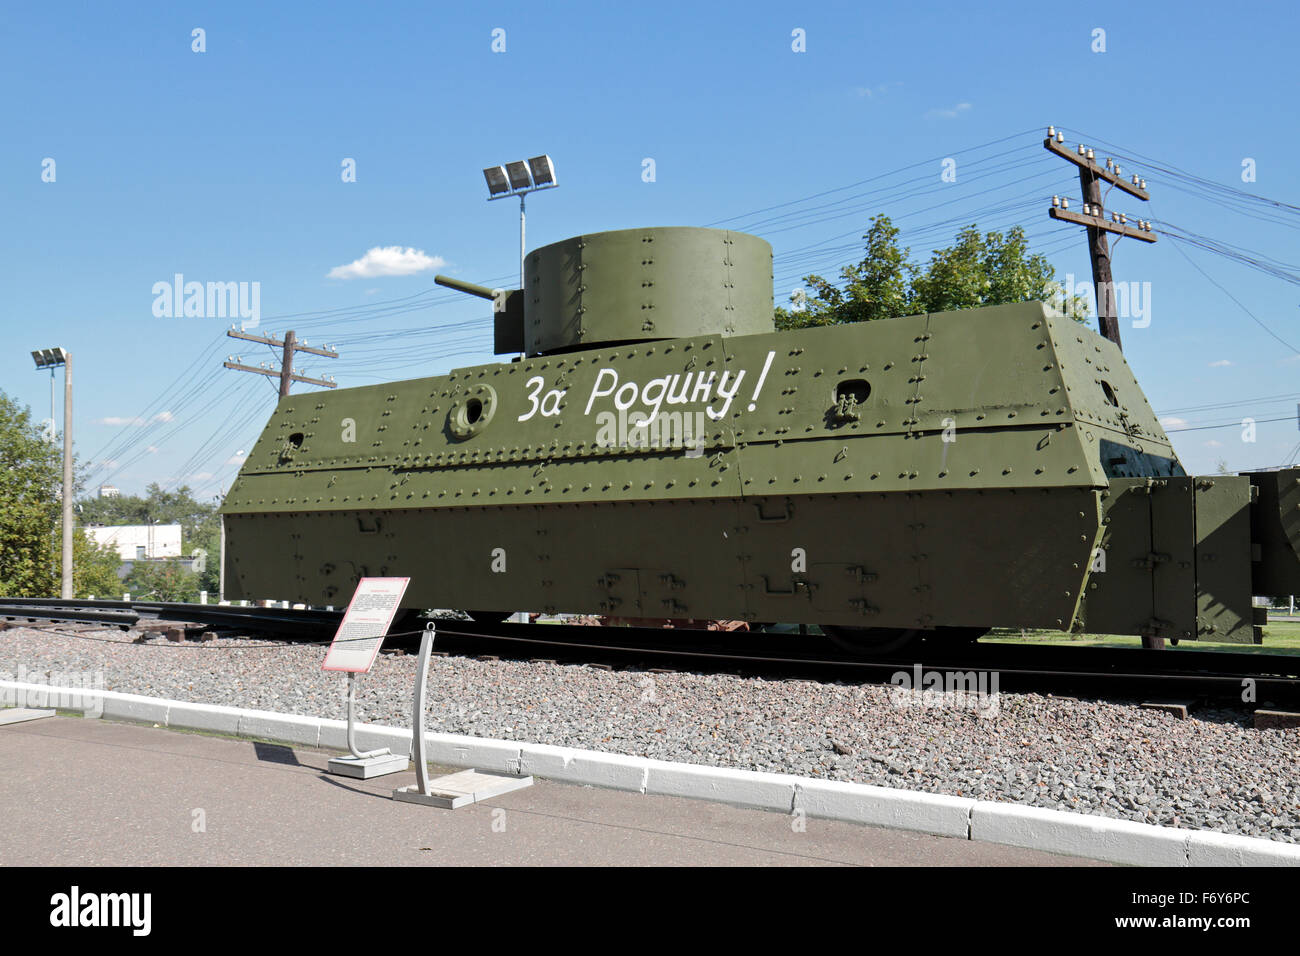 A Soviet Krasnovostochnik armoured train in the Exposition of Military Equipment in Park Pobedy, Moscow, Russia. Stock Photo